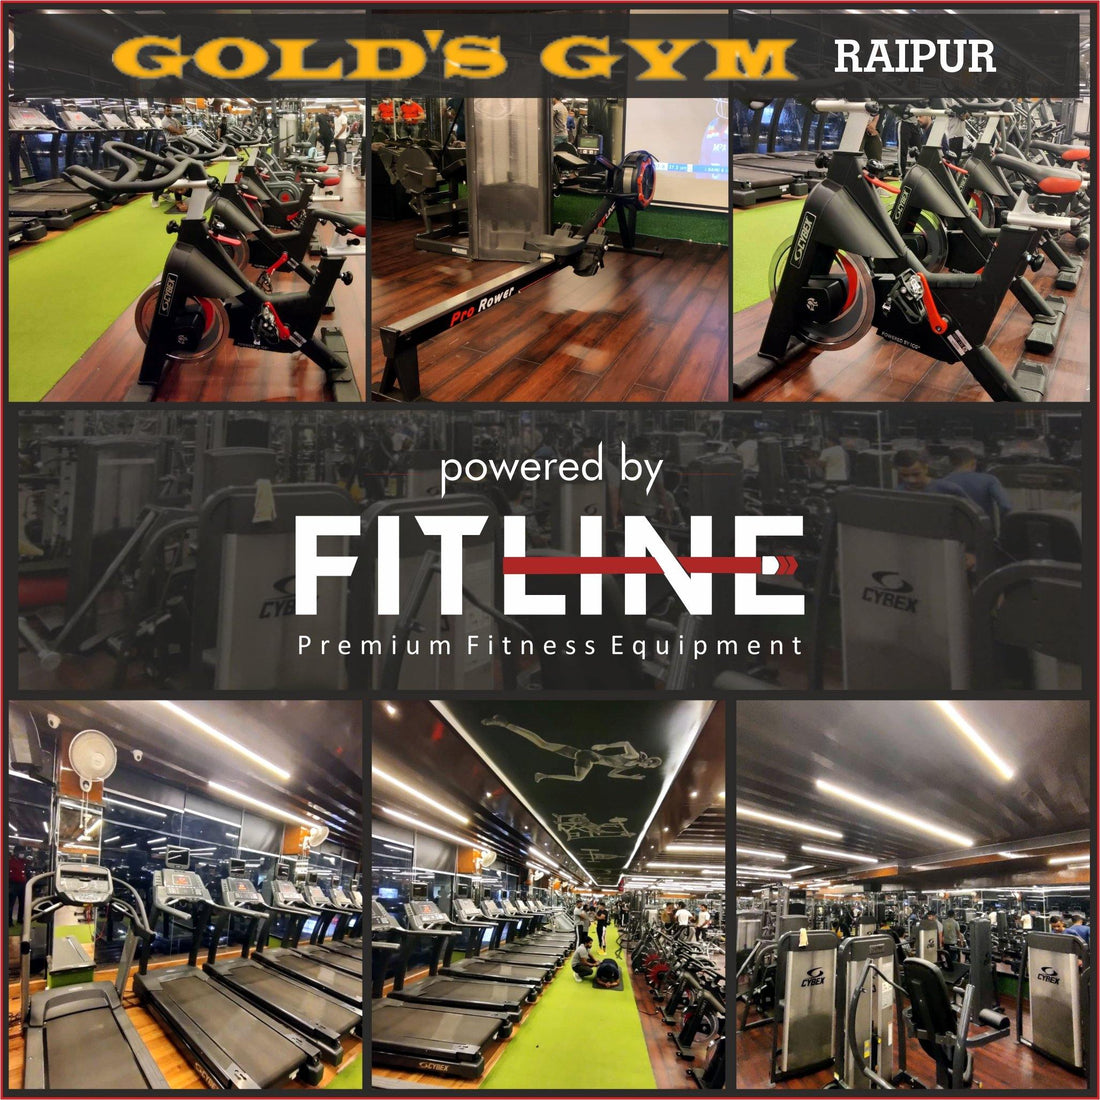 Latest installation by FitLine (Gold's Gym Raipur) - Fitline India